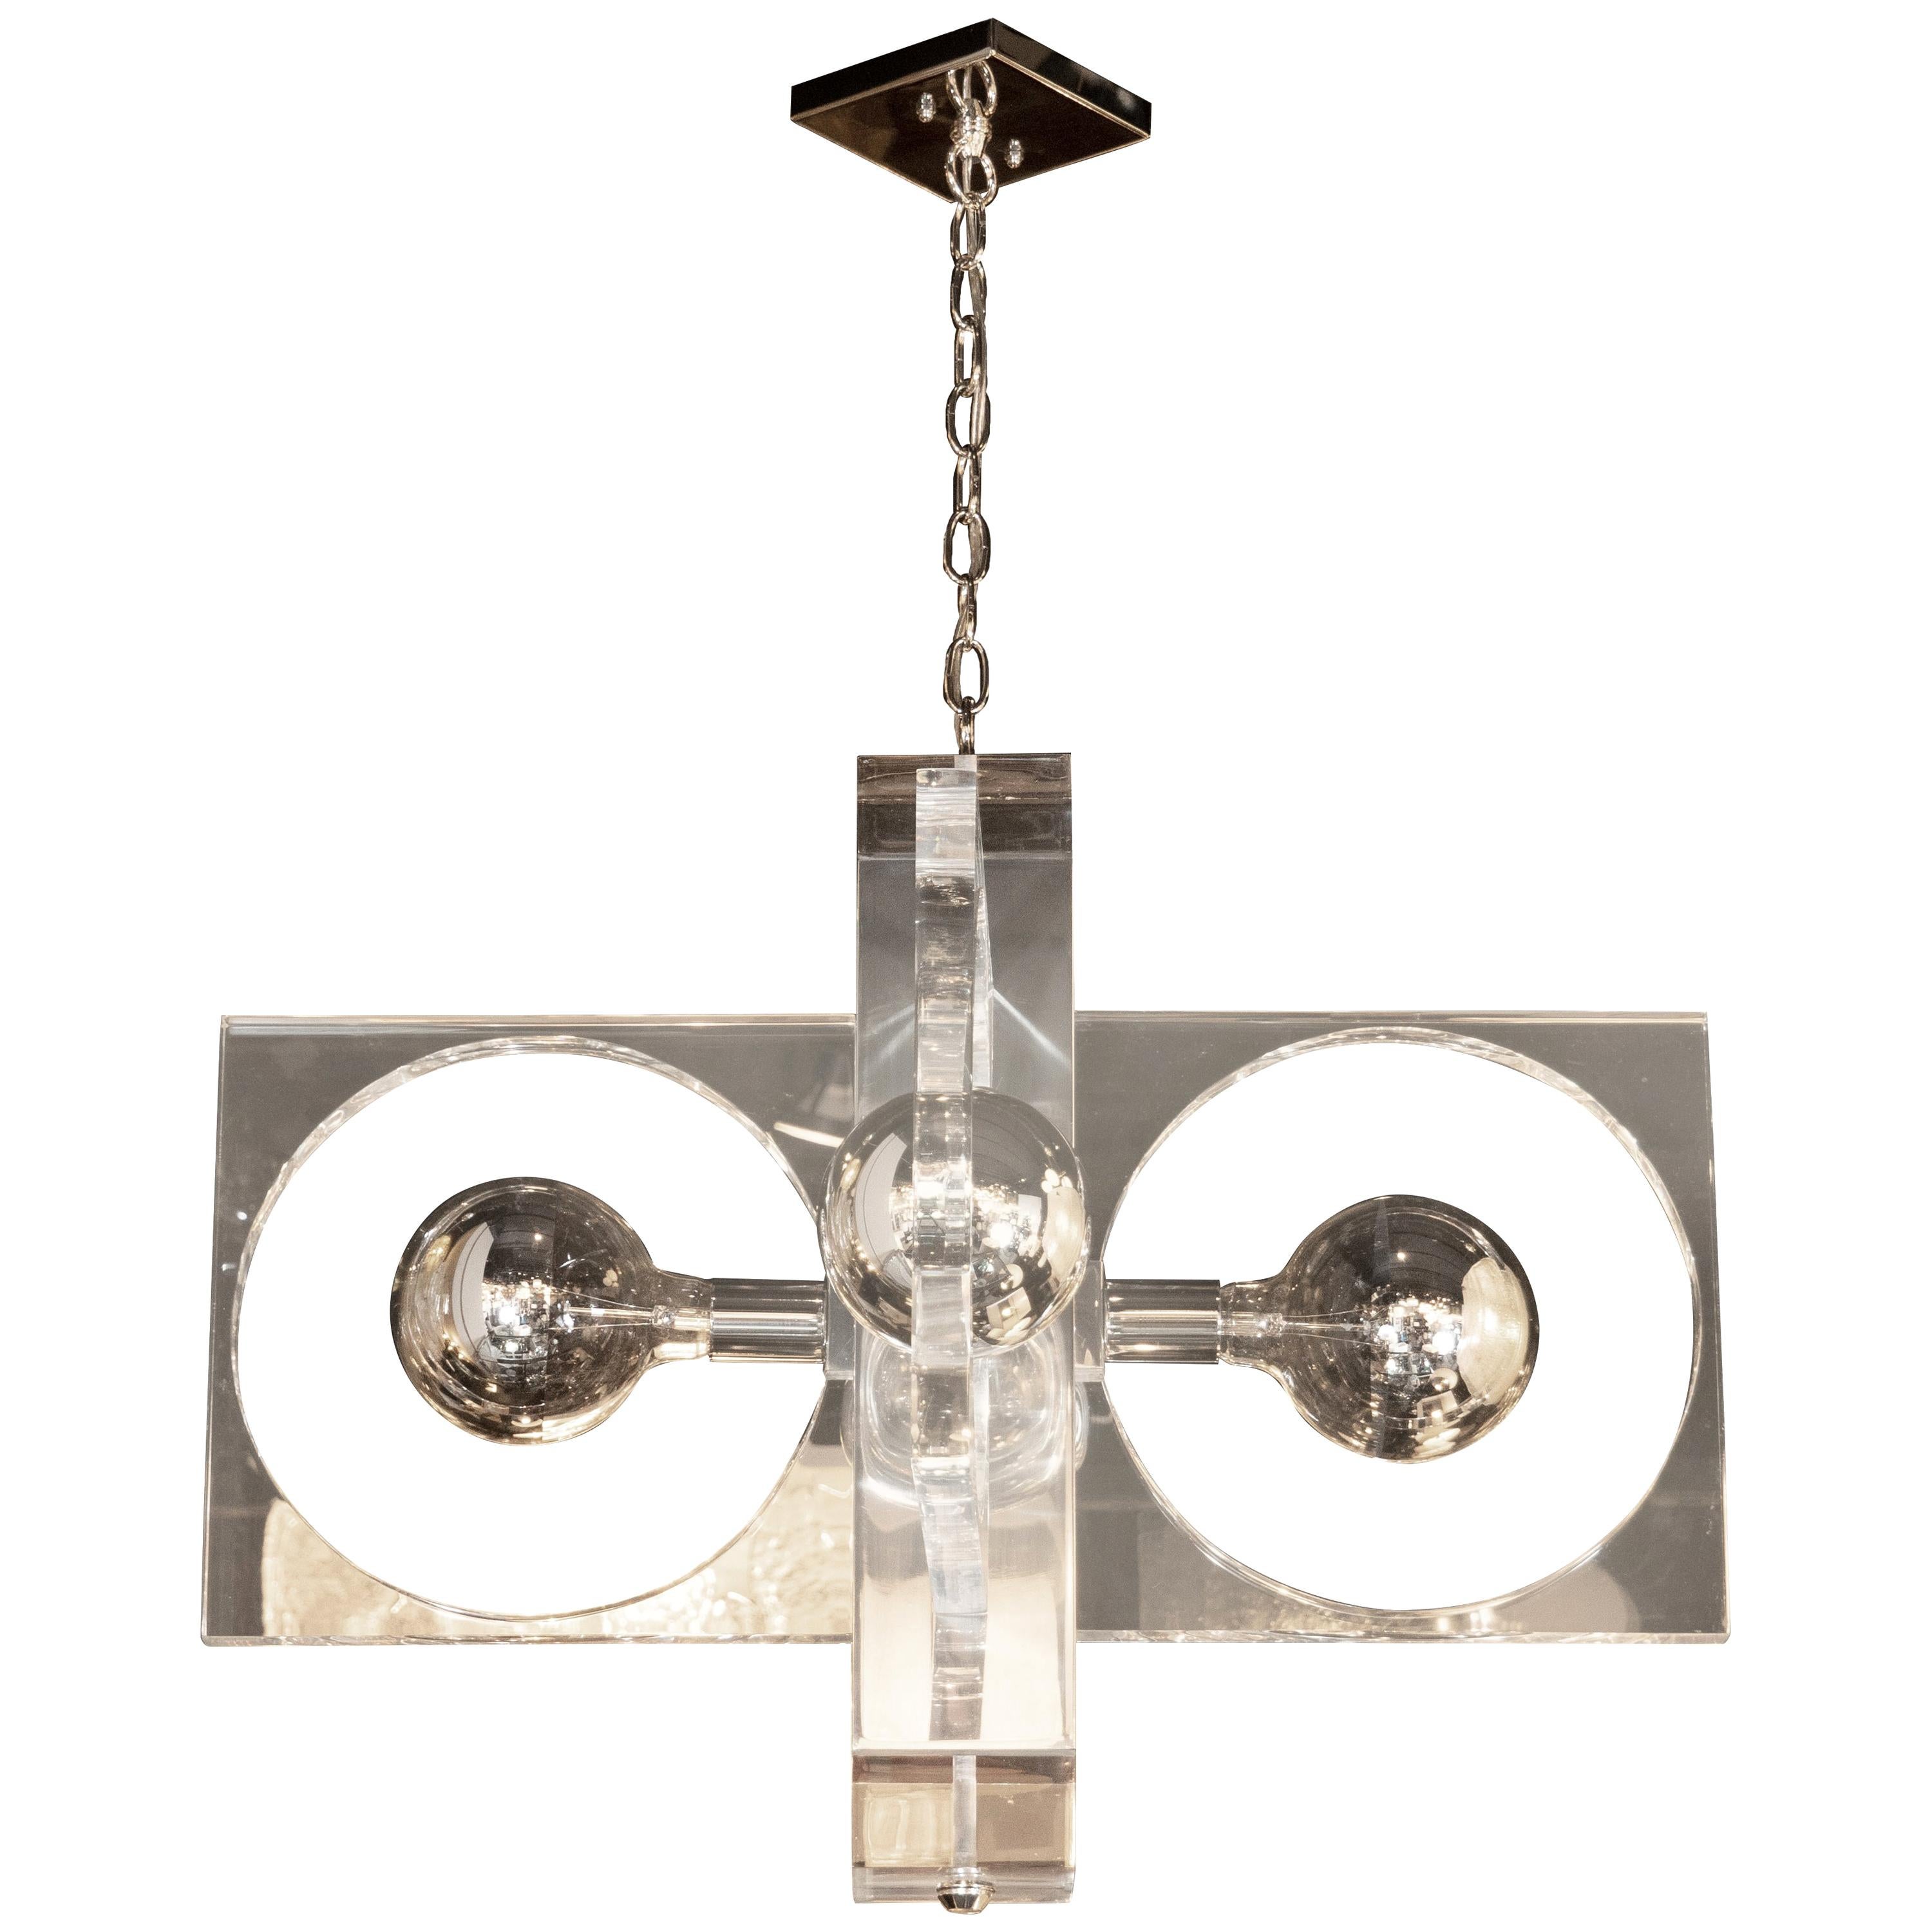 Mid-Century Modern Rectilinear Lucite and Chrome Chandelier